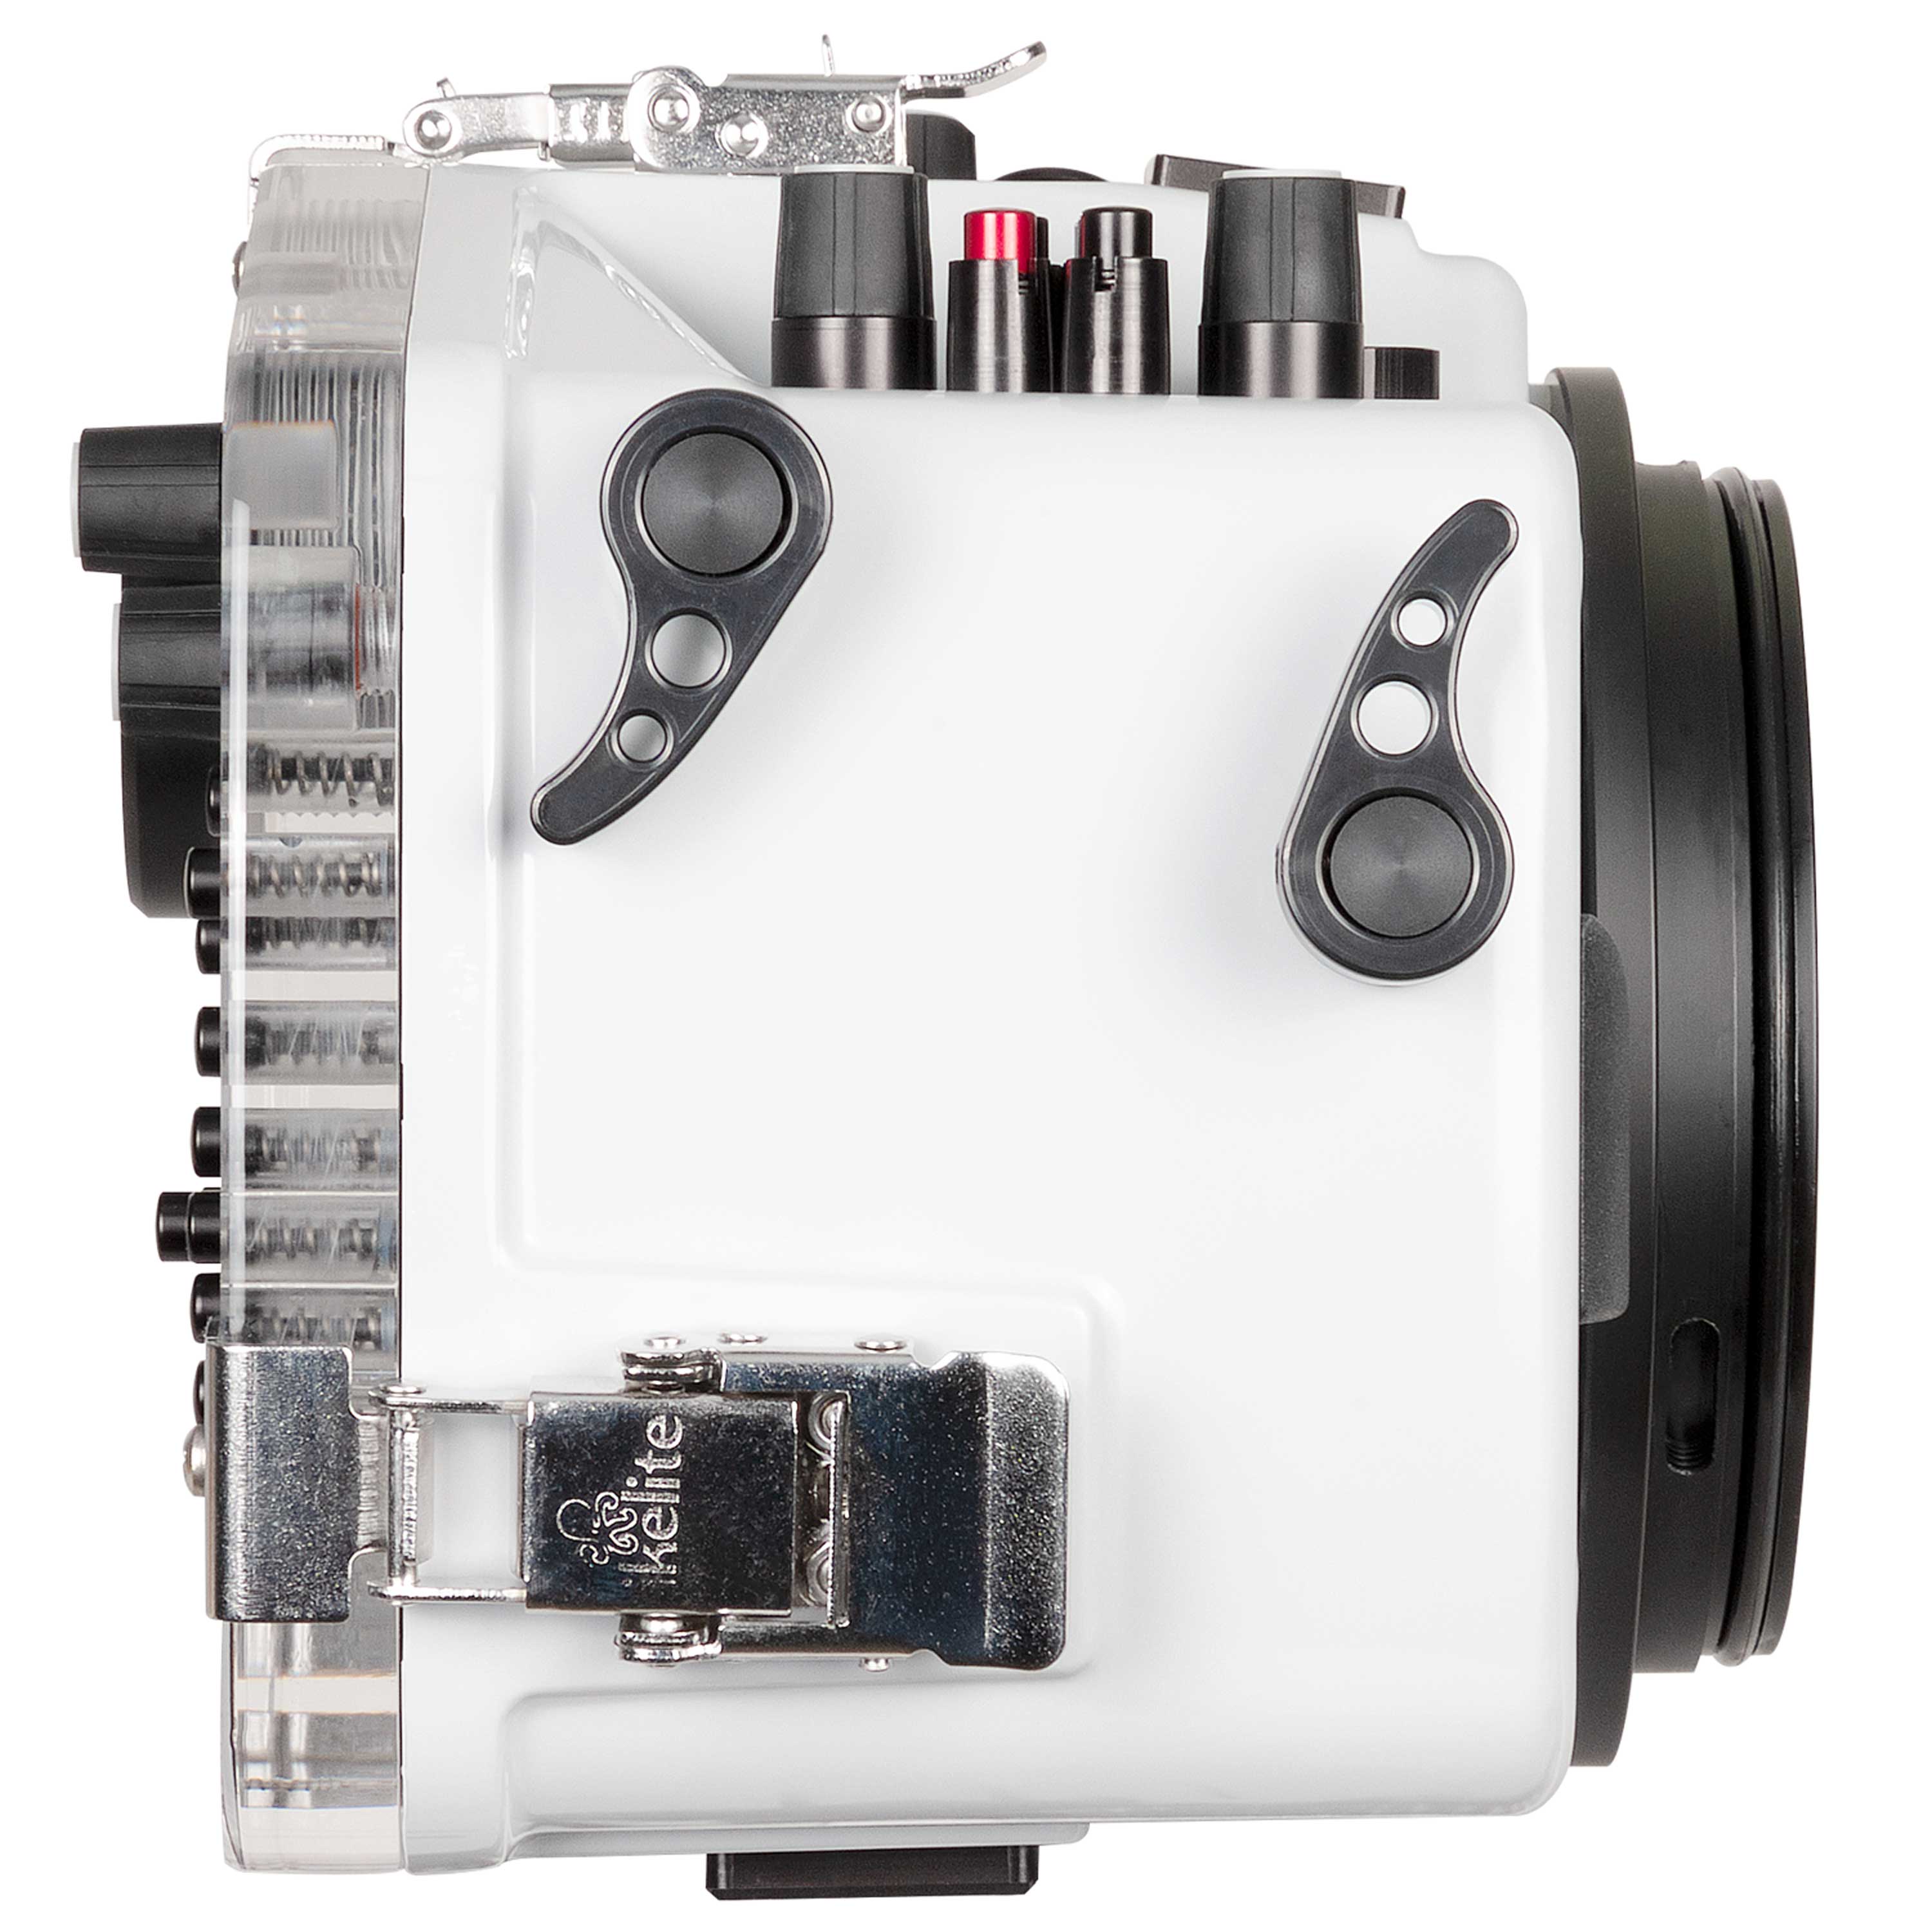 200DL Underwater Housing for Panasonic Lumix GH5, GH5S Mirrorless Micro Four-Thirds Cameras